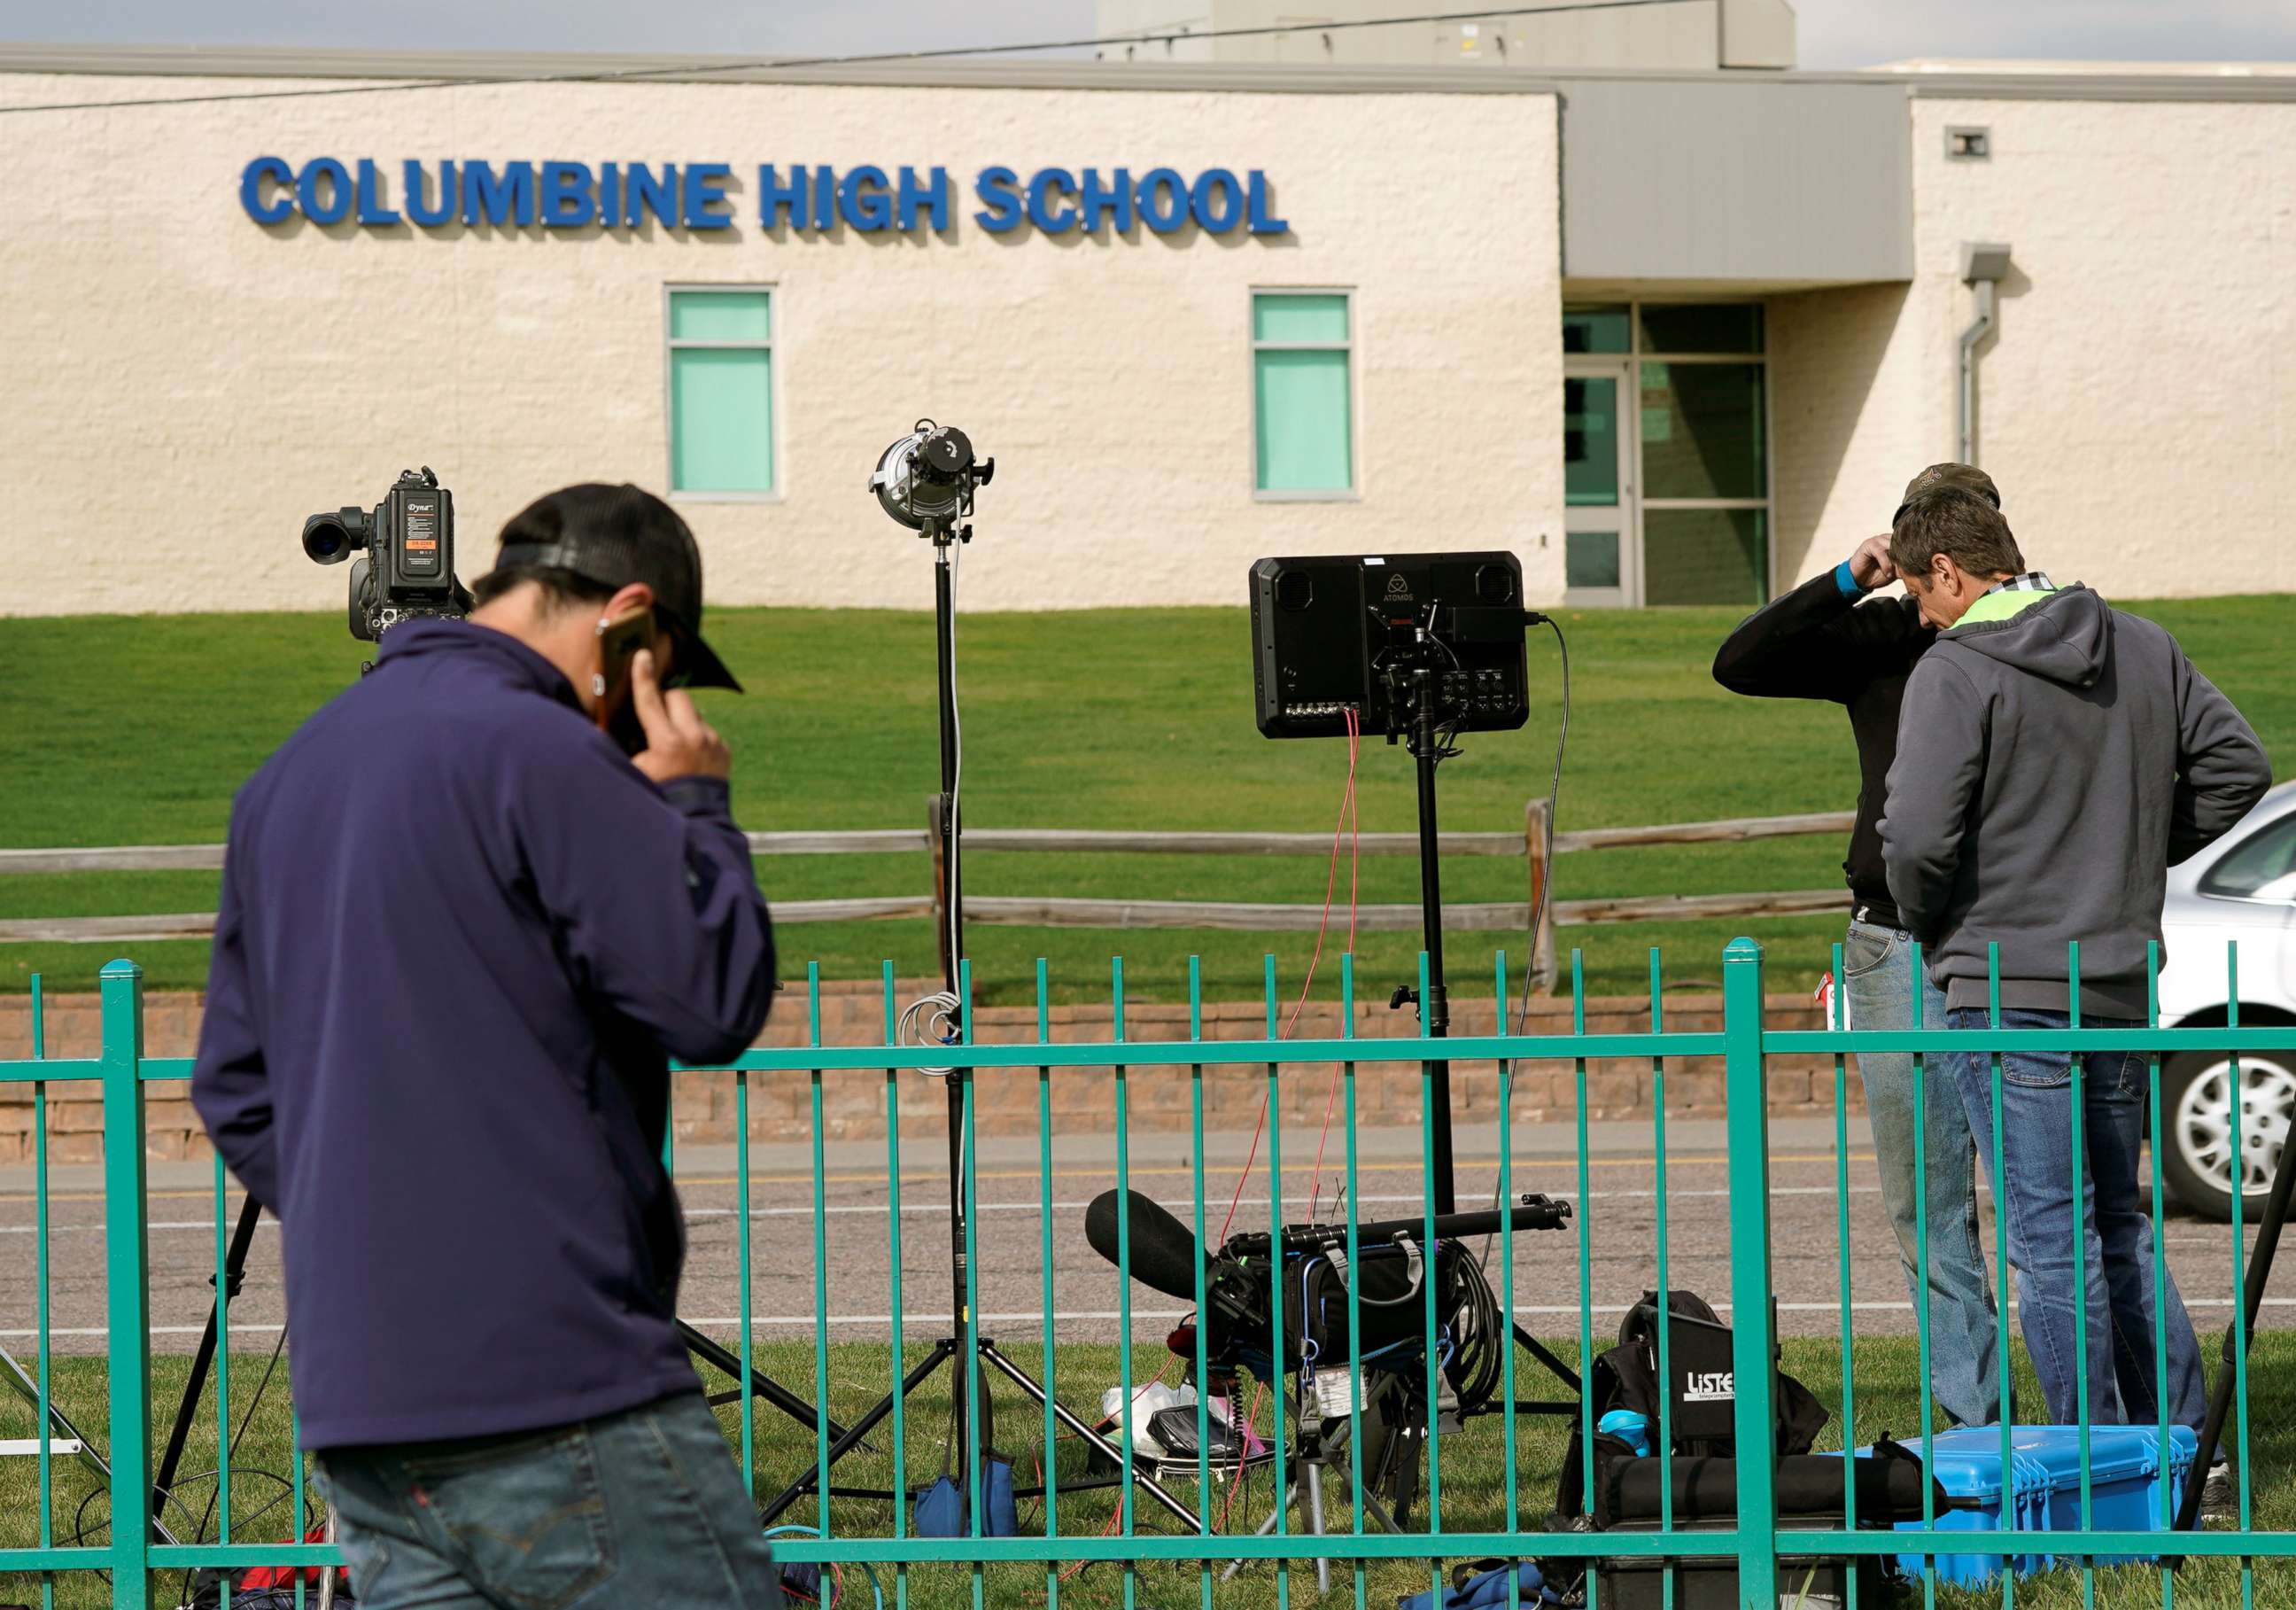 PHOTO: Members of the media gather outside Columbine High School after some Denver area schools closed during a police search for an armed woman "infatuated" with the Columbine massacre, in Littleton, Colo., April 17, 2019.